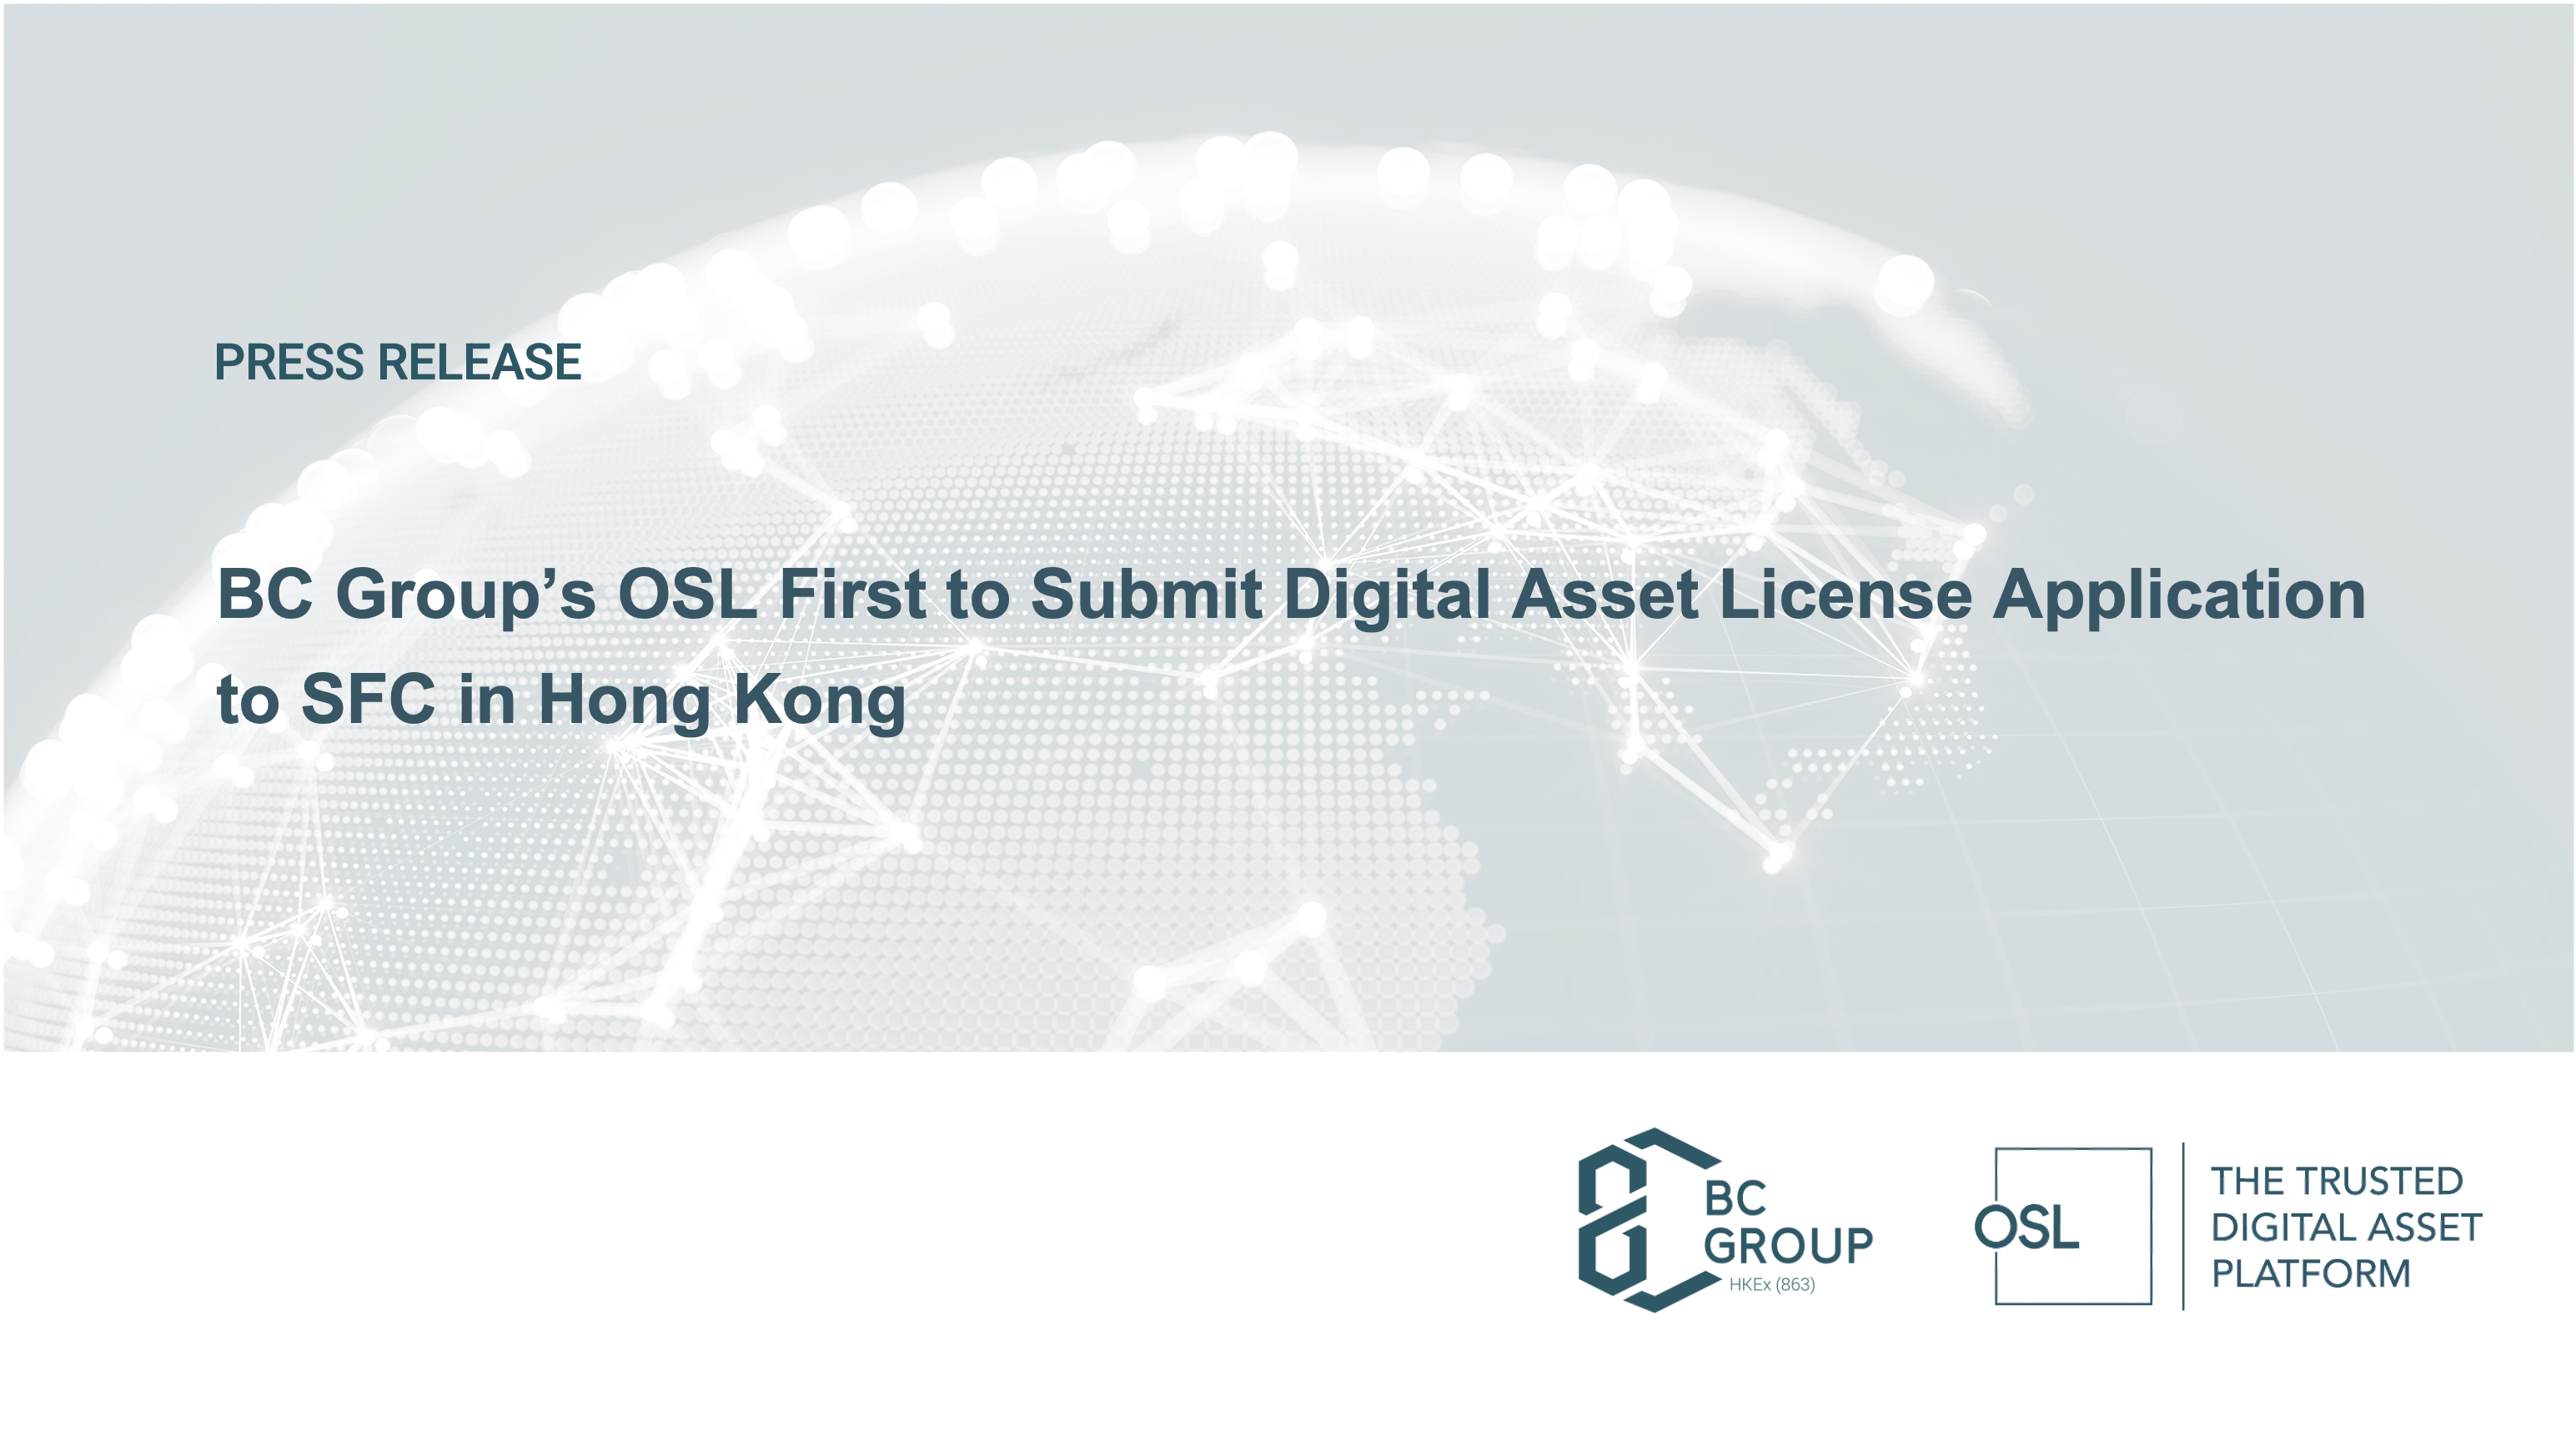 BC Group’s OSL First to Submit Digital Asset License Application to SFC in Hong Kong